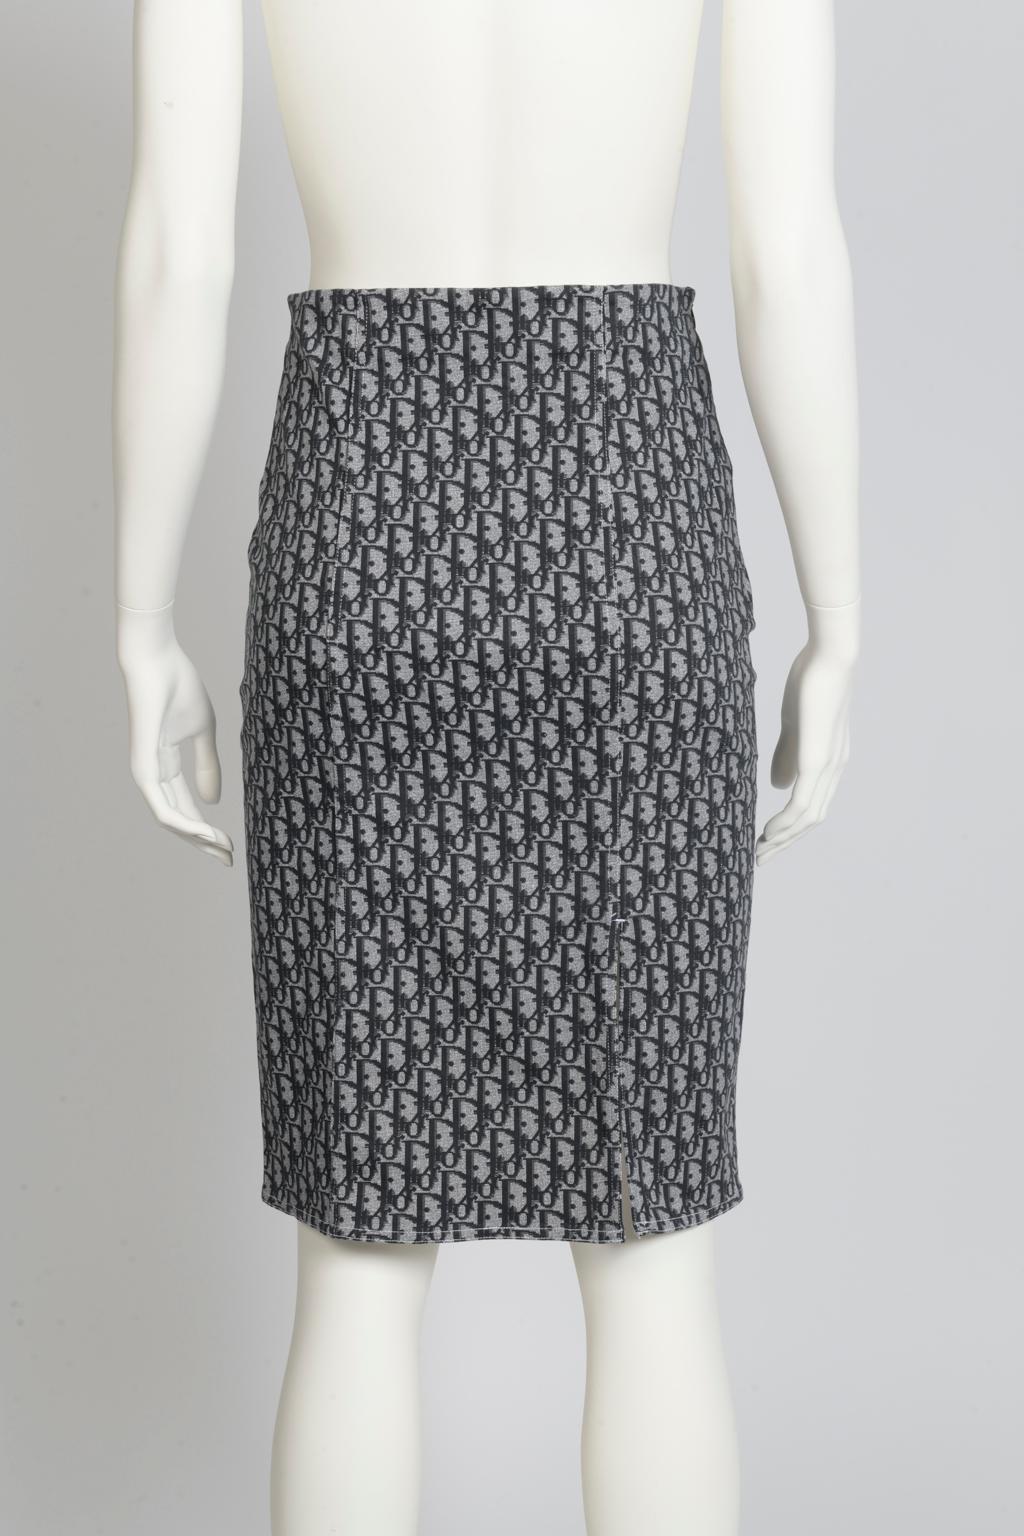 Christian Dior By John Galliano Dior Oblique Pencil Skirt at 1stDibs ...